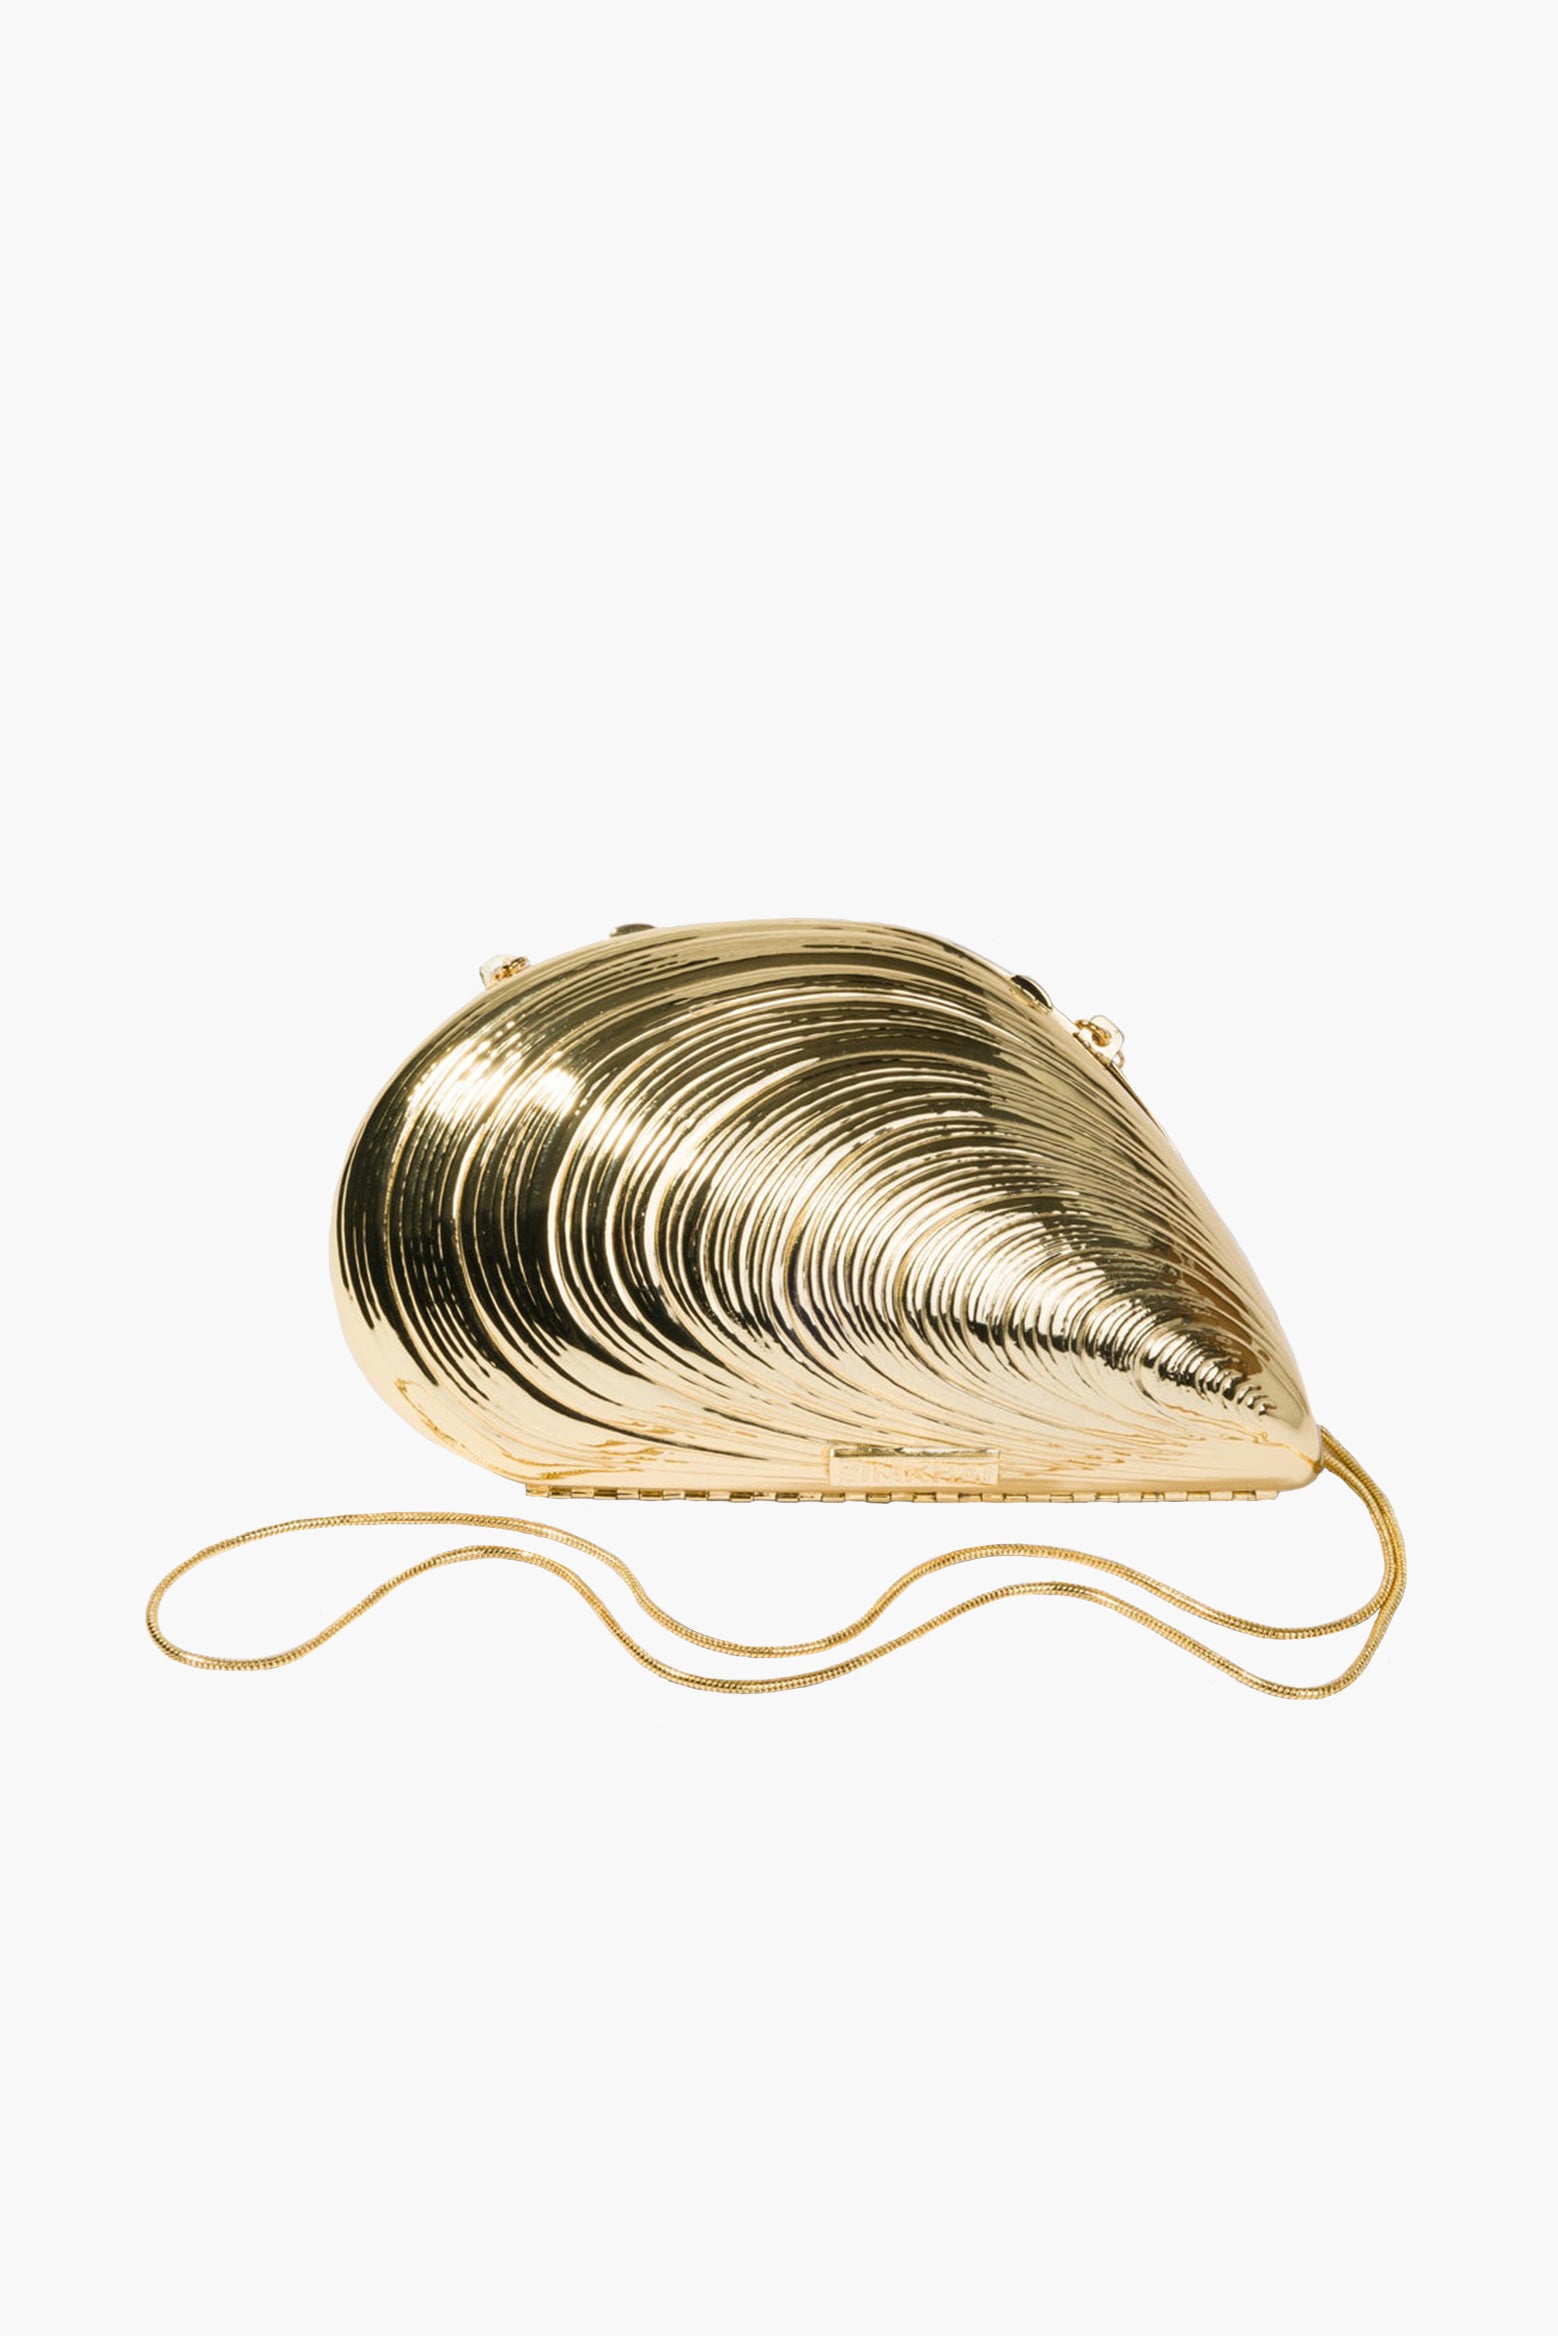 The Jonathan Simkhai Bridget Metal Oyster Shell Clutch in Gold available at The New Trend Australia